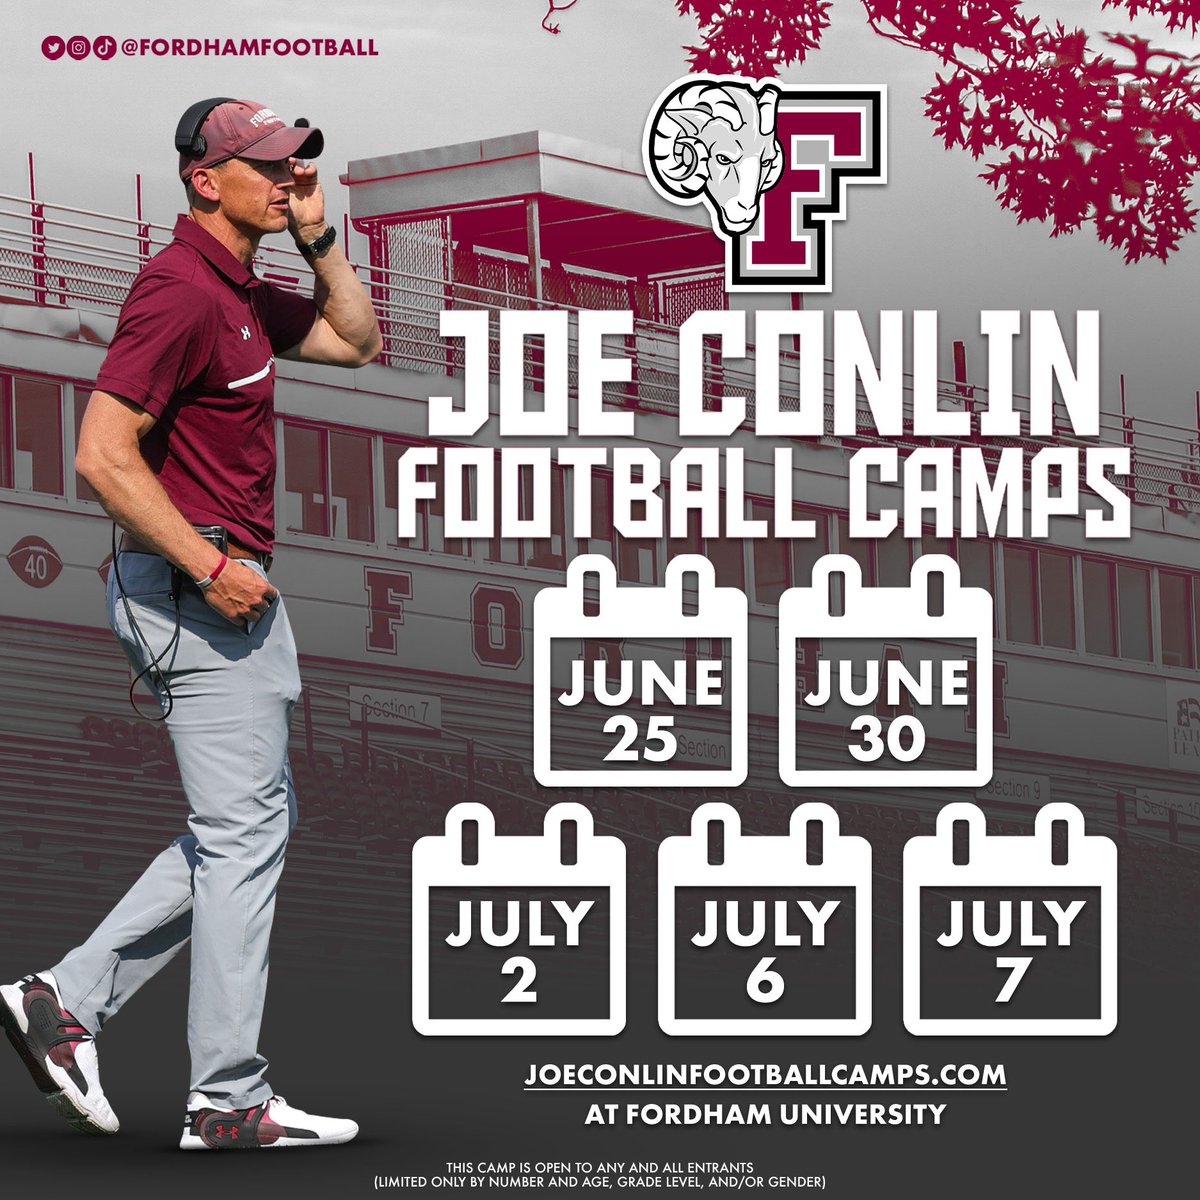 5️⃣ more opportunities to come and compete in NYC ‼️ 

Register below ⬇️ joeconlinfootballcamps.com

#RAMILY